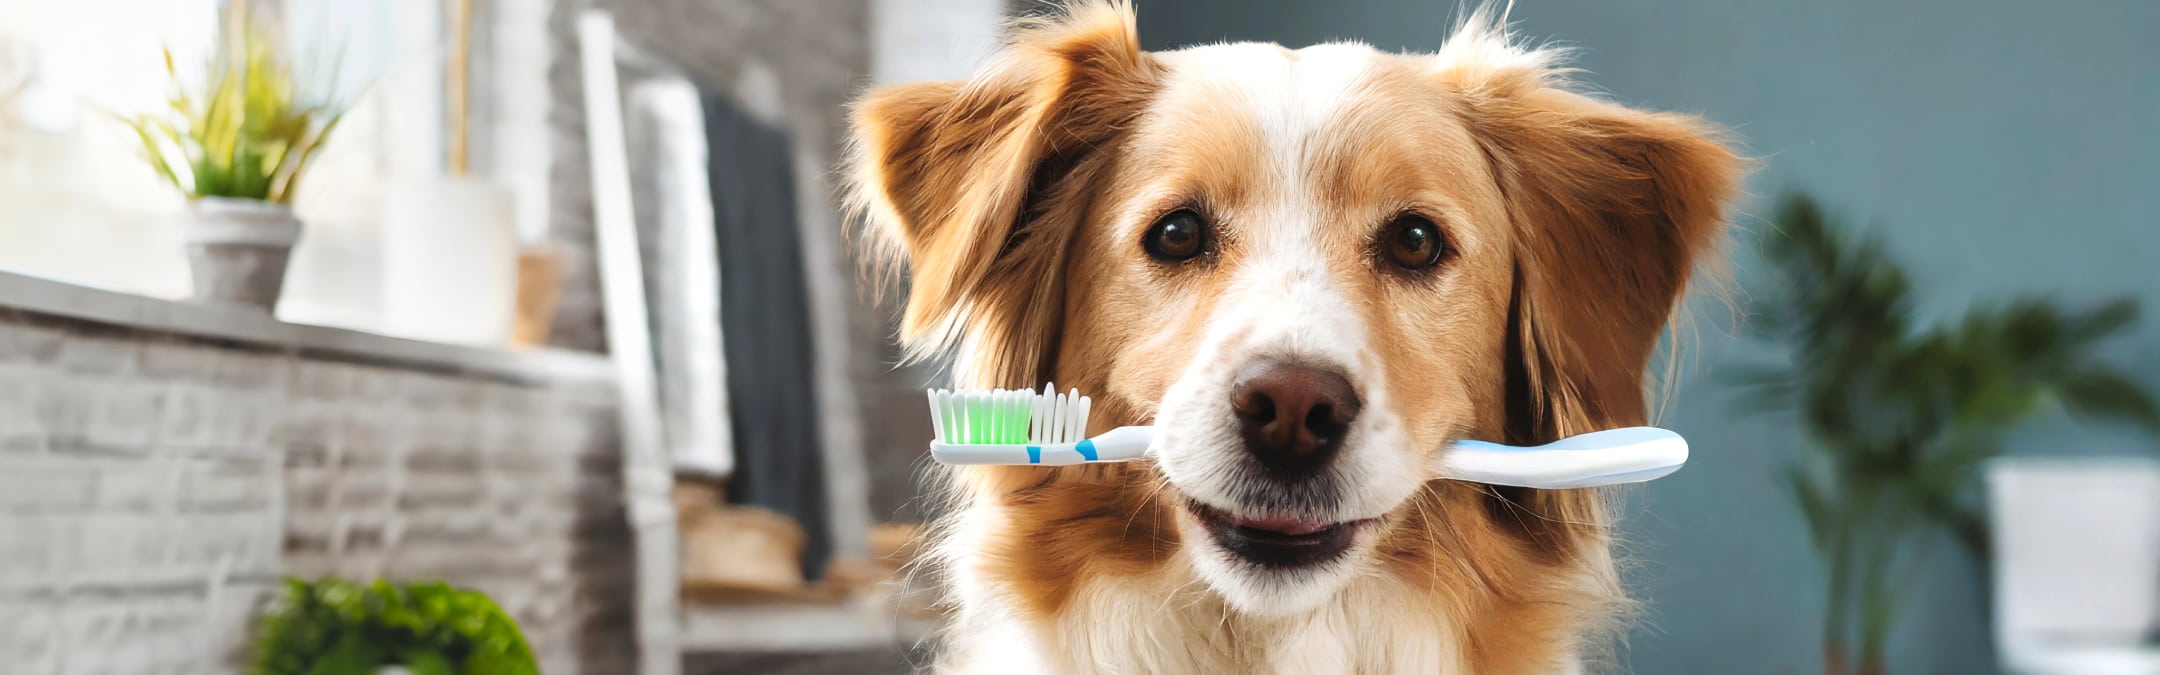 How To Brush Your Dog’s Teeth At Home